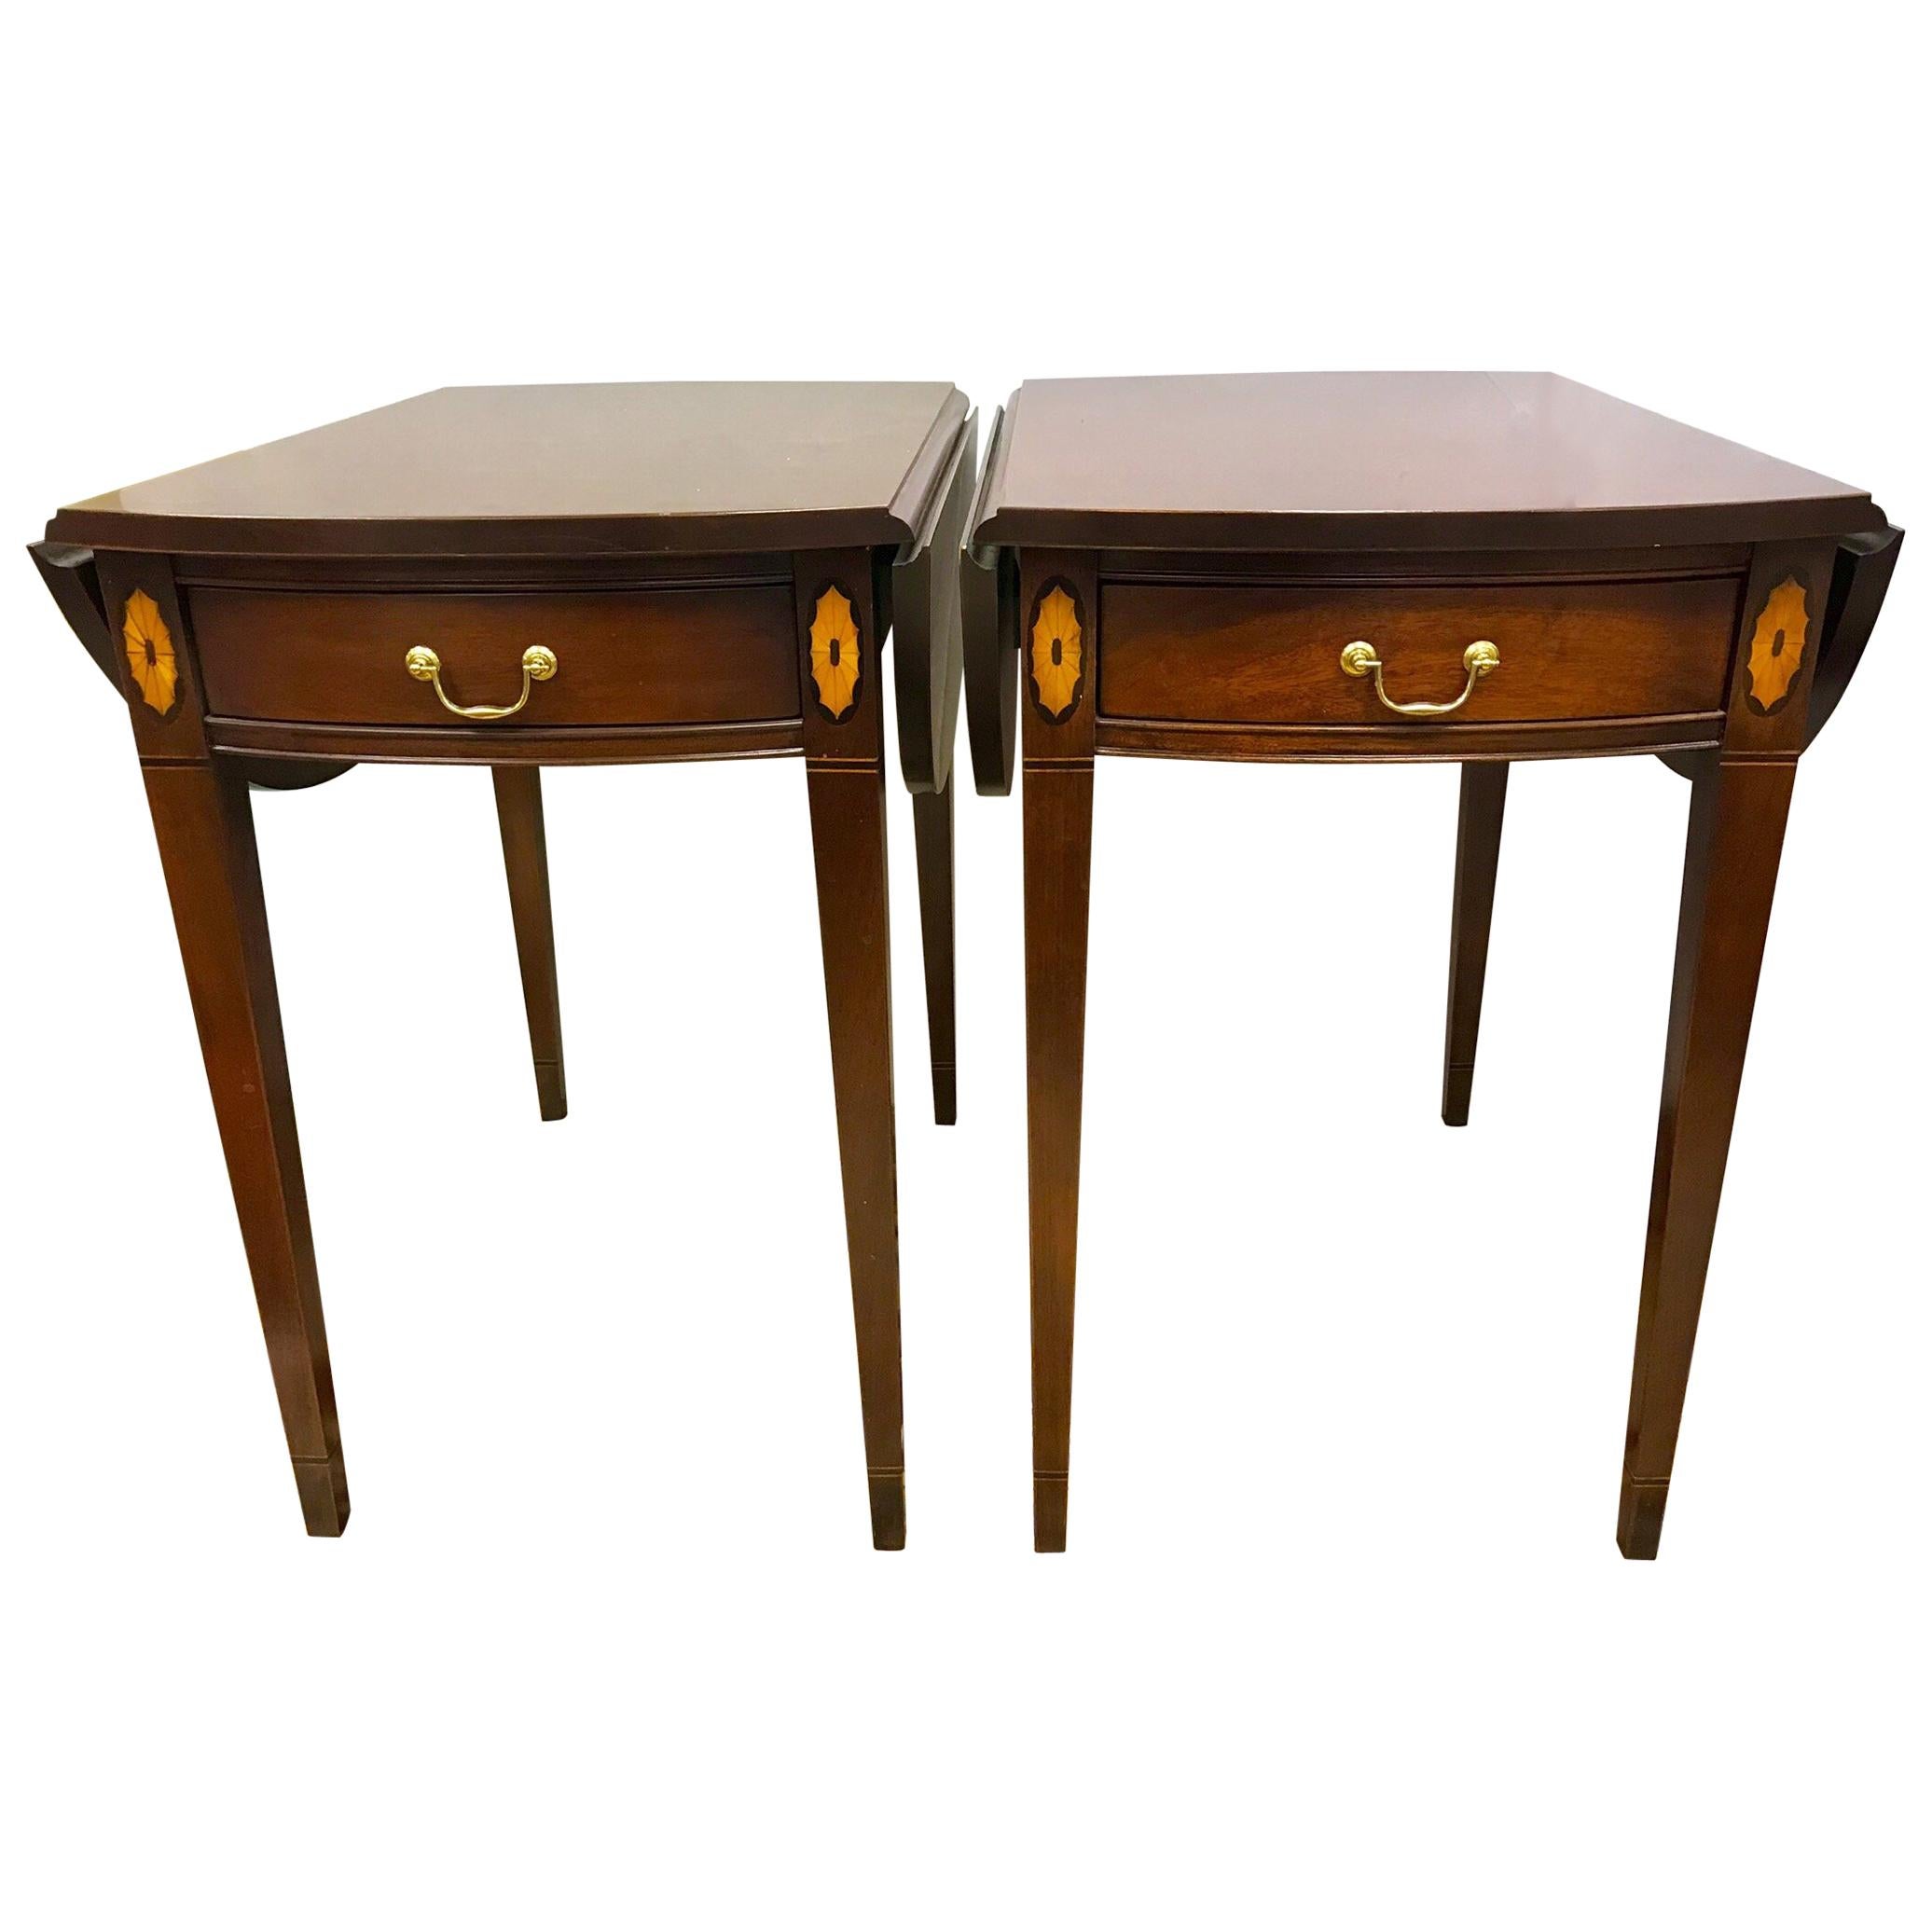 Pair of Hickory Chair Federal Mahogany Inlay Drop-leaf End Tables